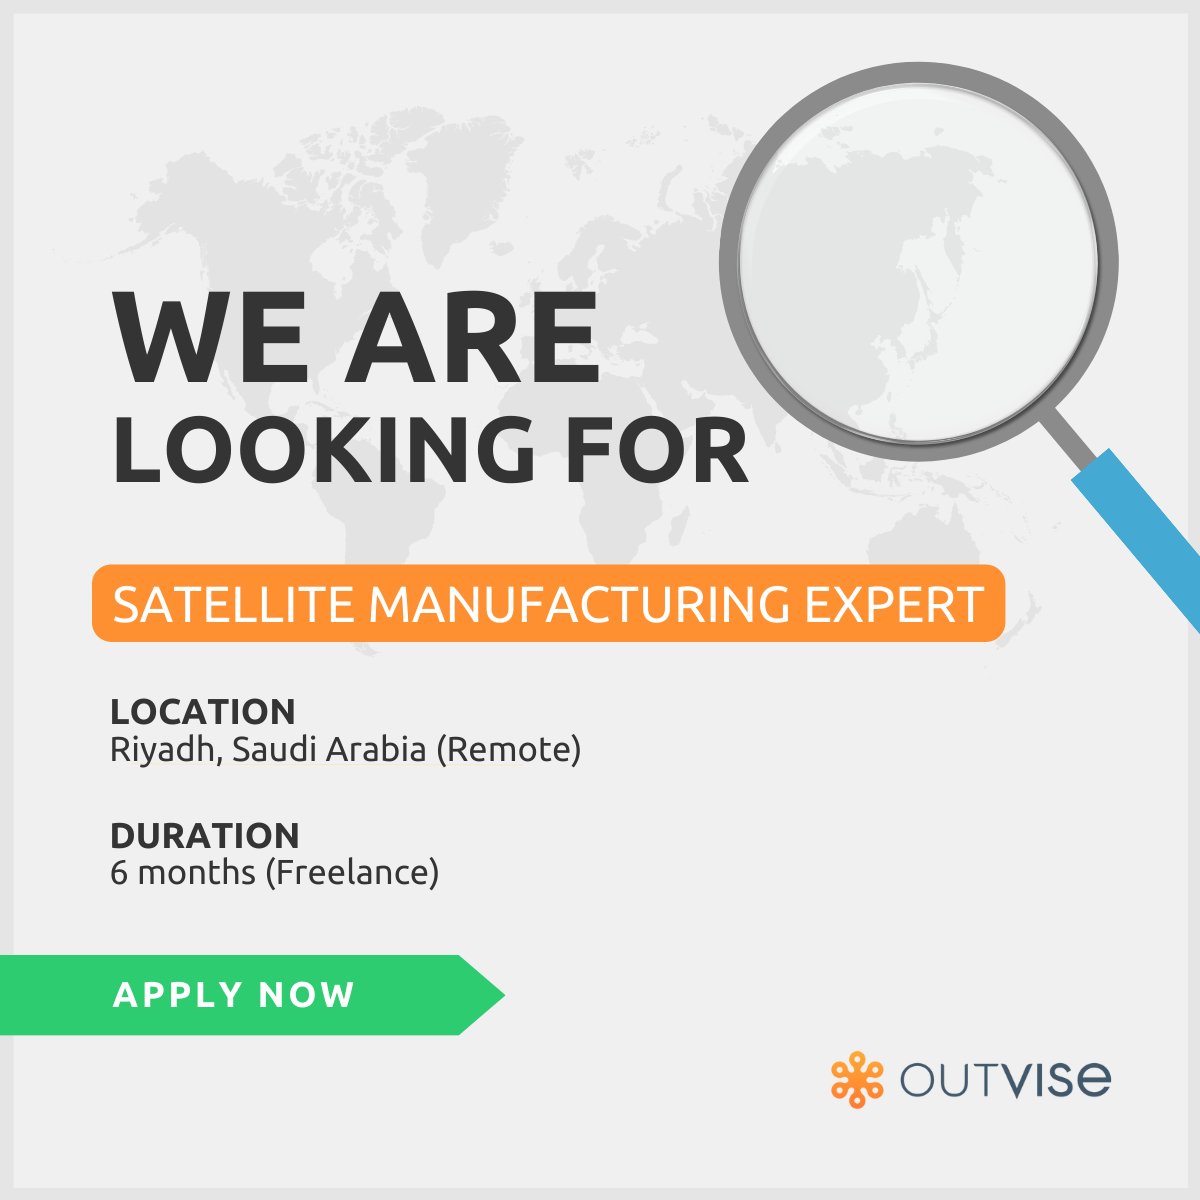 Our client is seeking a Satellite Manufacturing Expert. 🔎

Apply here 👉 outvise.com/sl/NIPsE2-xDG

#OutviseProjects #Freelance #Hiringnow #MiddleEast